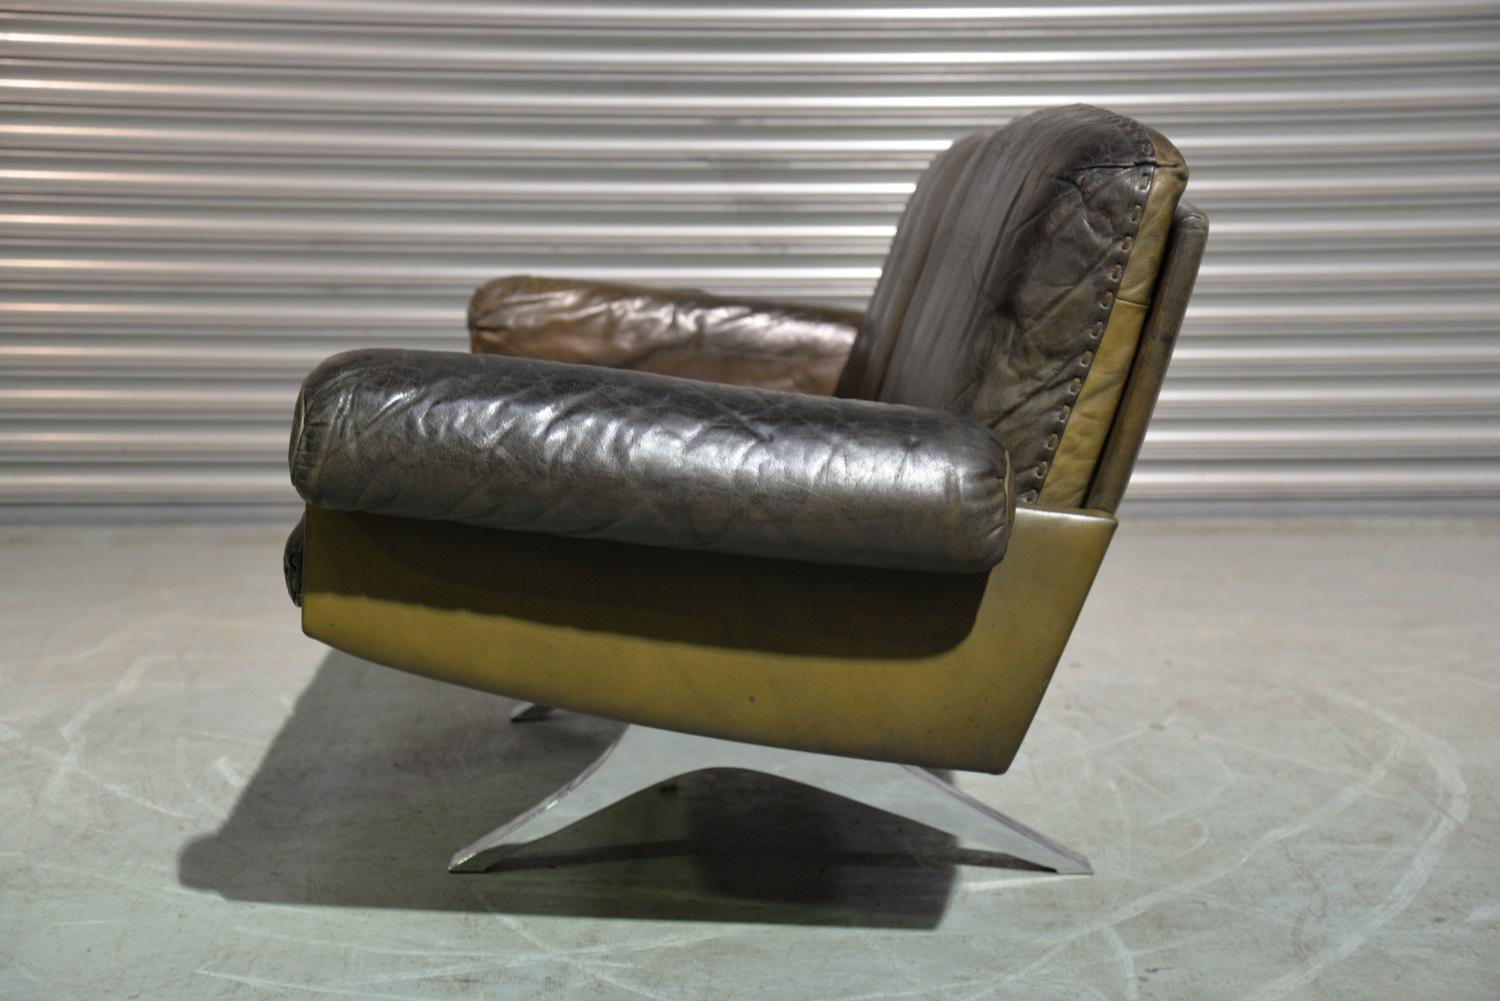 Late 20th Century Vintage De Sede DS 31 Leather Two-Seat Sofa or Loveseat, Switzerland 1970s For Sale